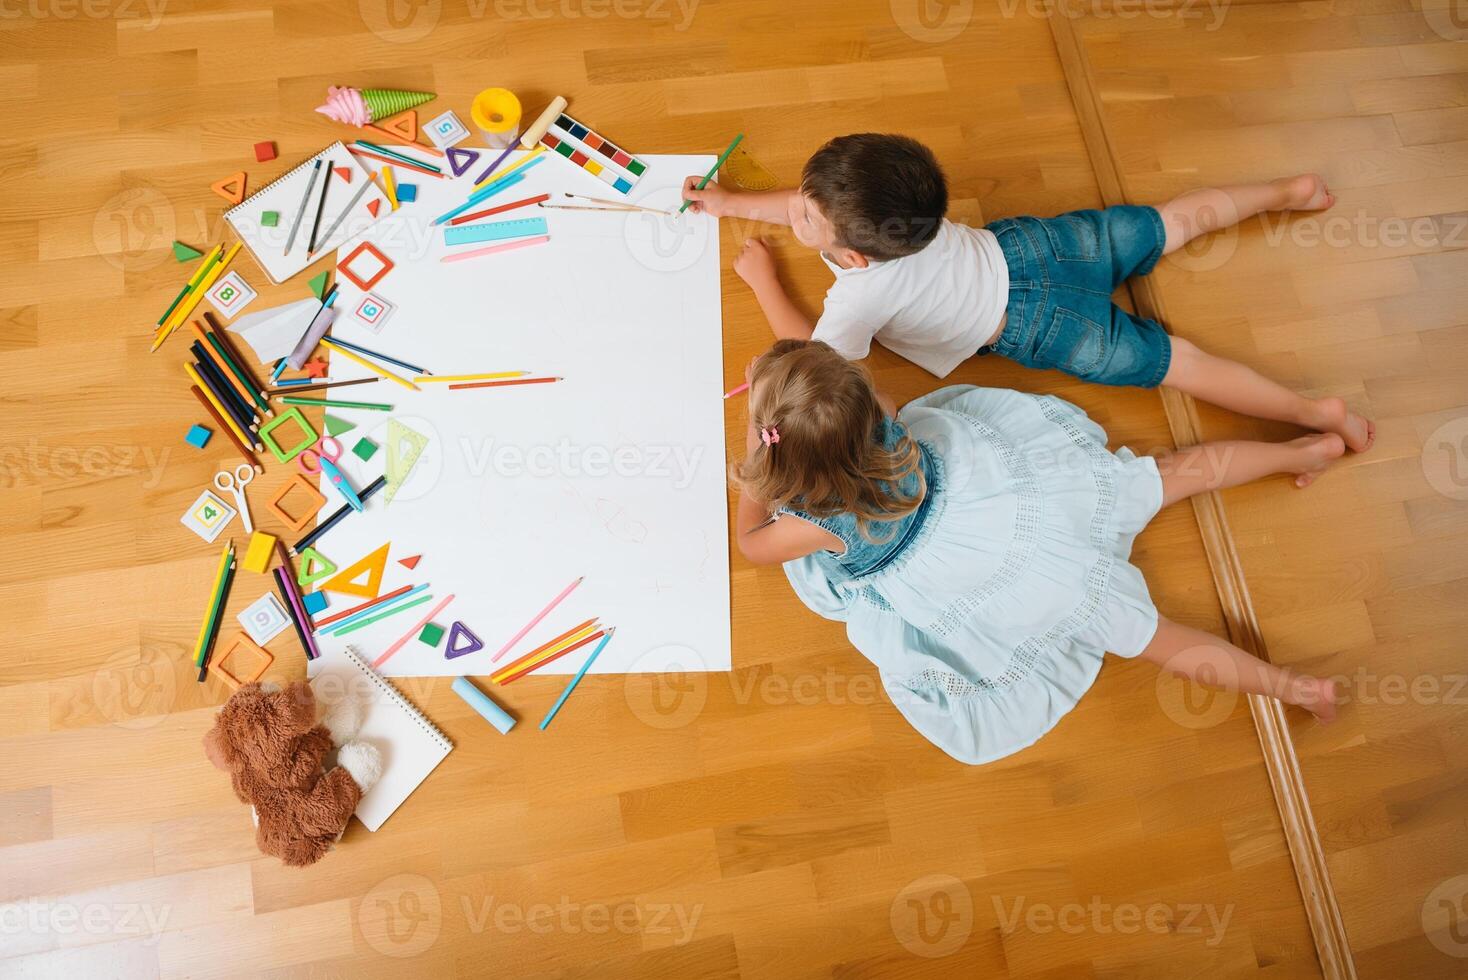 Kids drawing on floor on paper. Preschool boy and girl play on floor with educational toys - blocks, train, railroad, plane. Toys for preschool and kindergarten. Children at home or daycare. Top view. photo